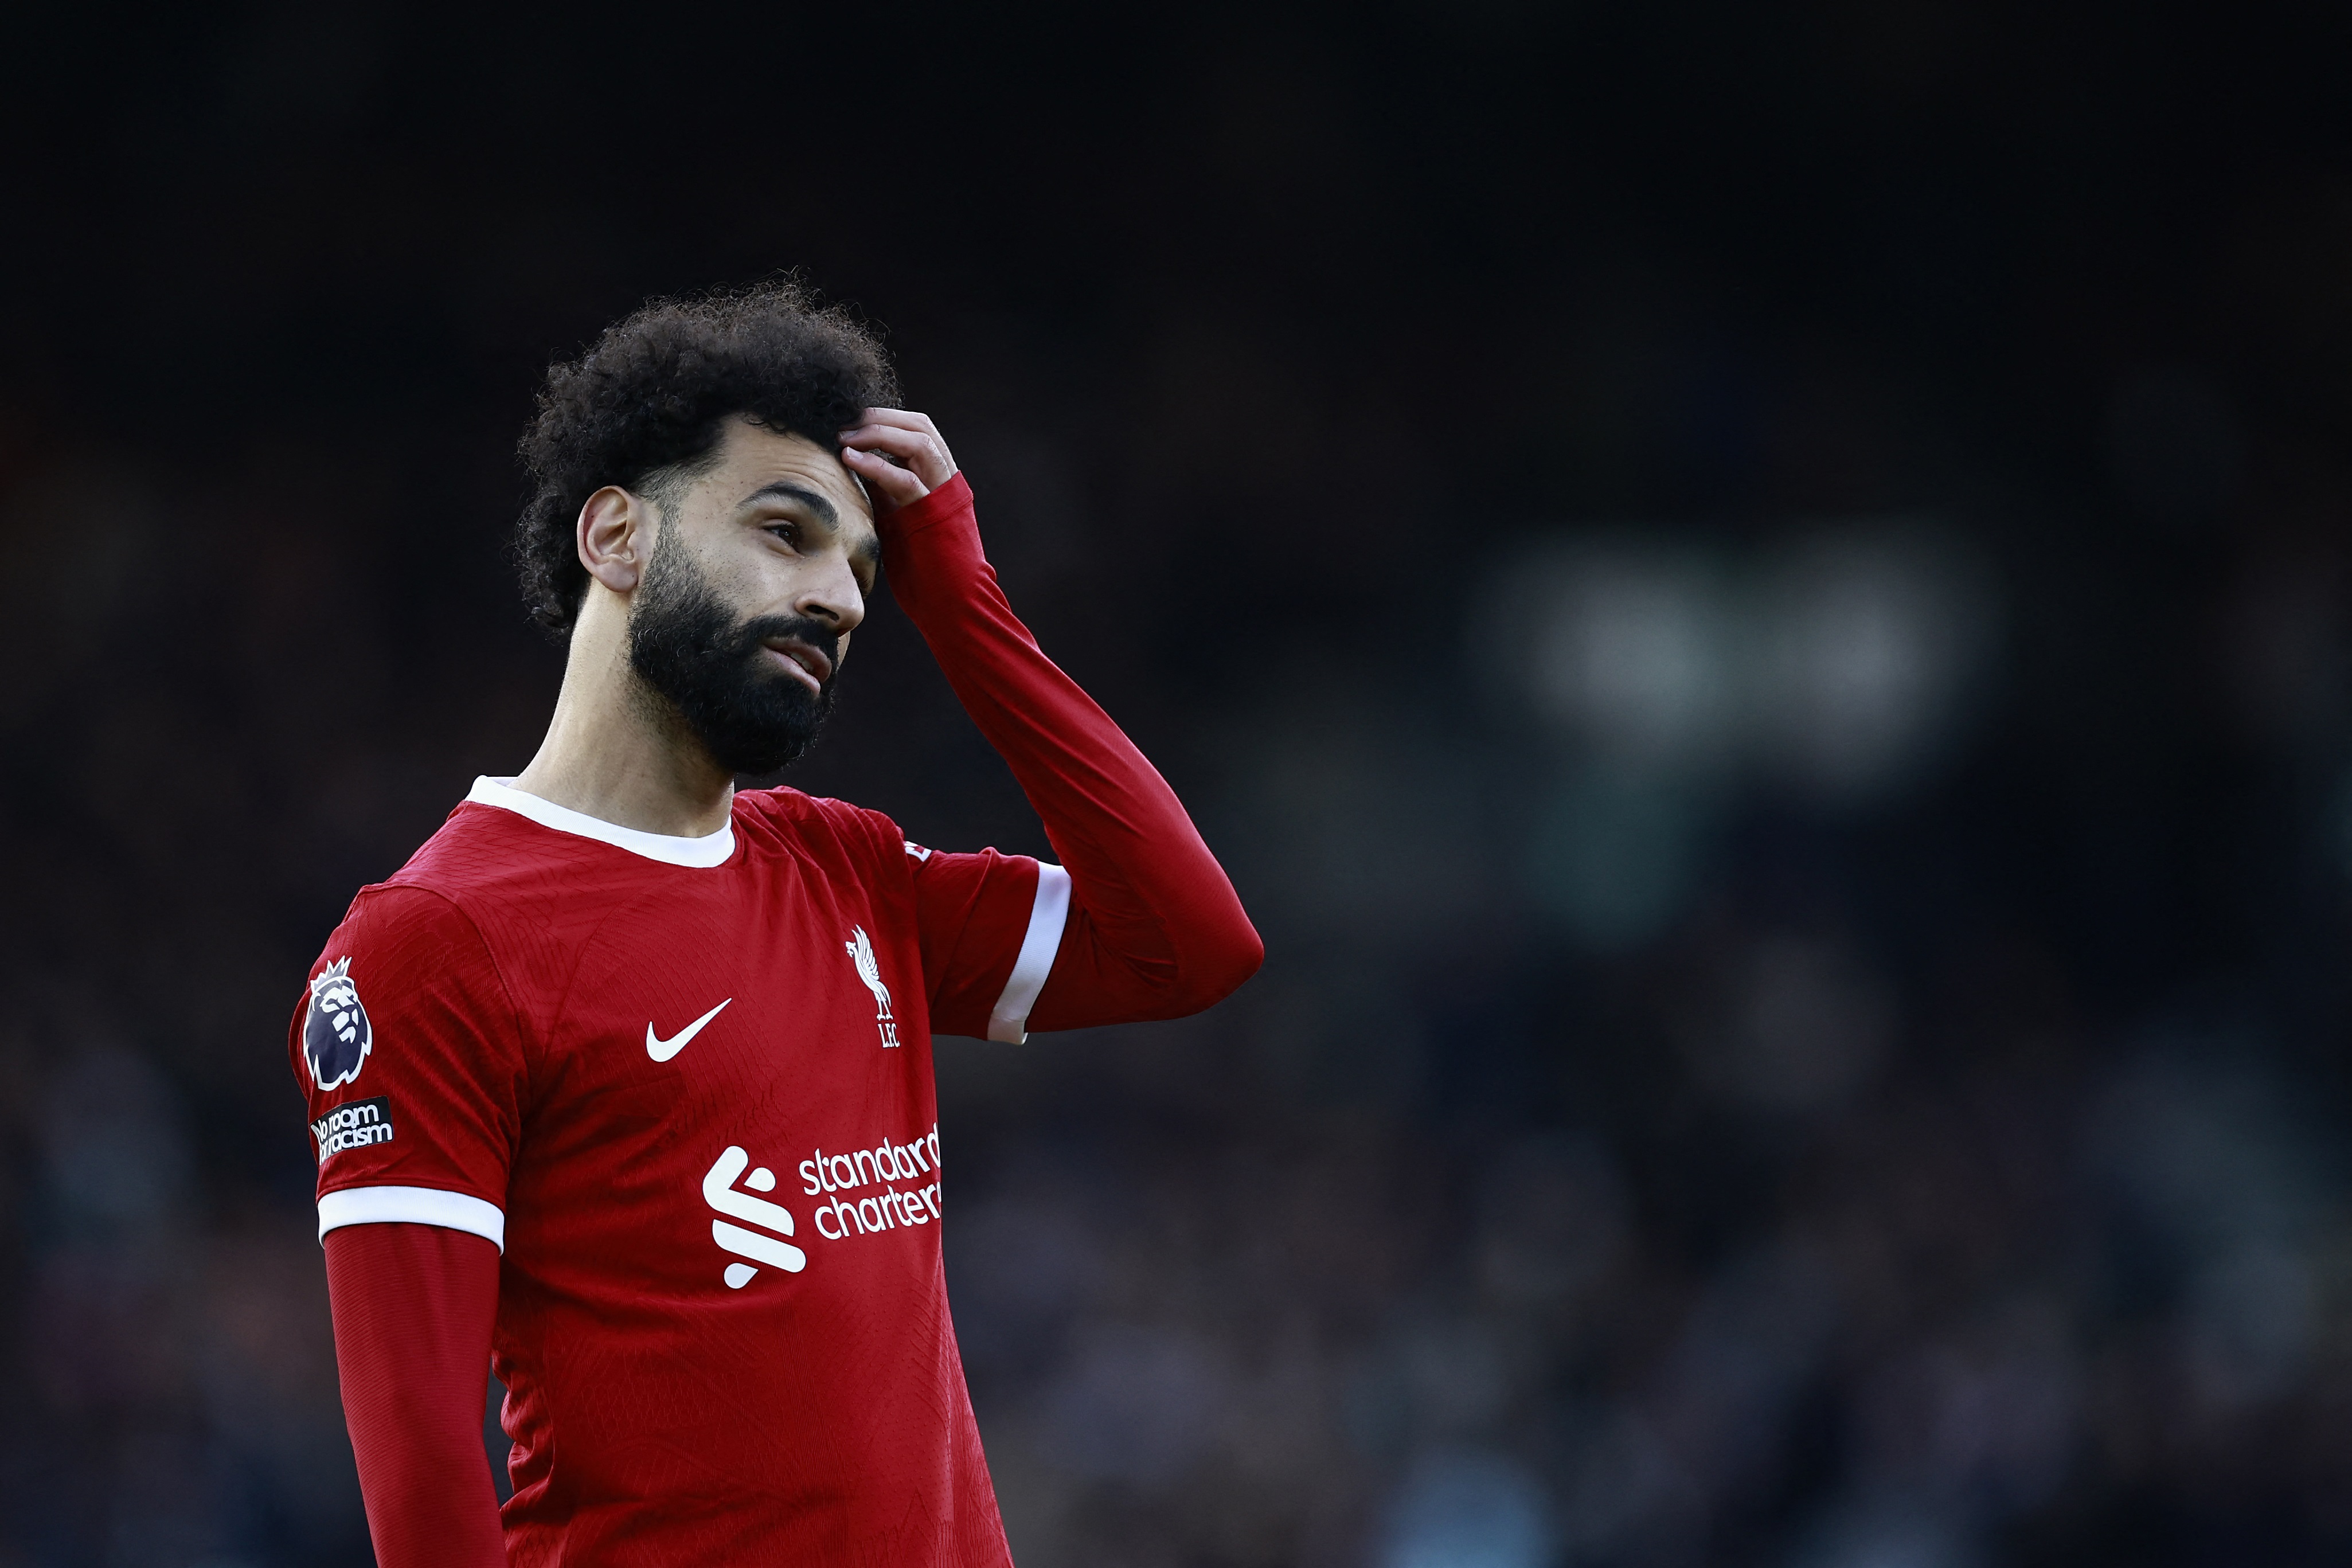 Potential next Liverpool manager adores Mo Salah; no question he’d love to manage him